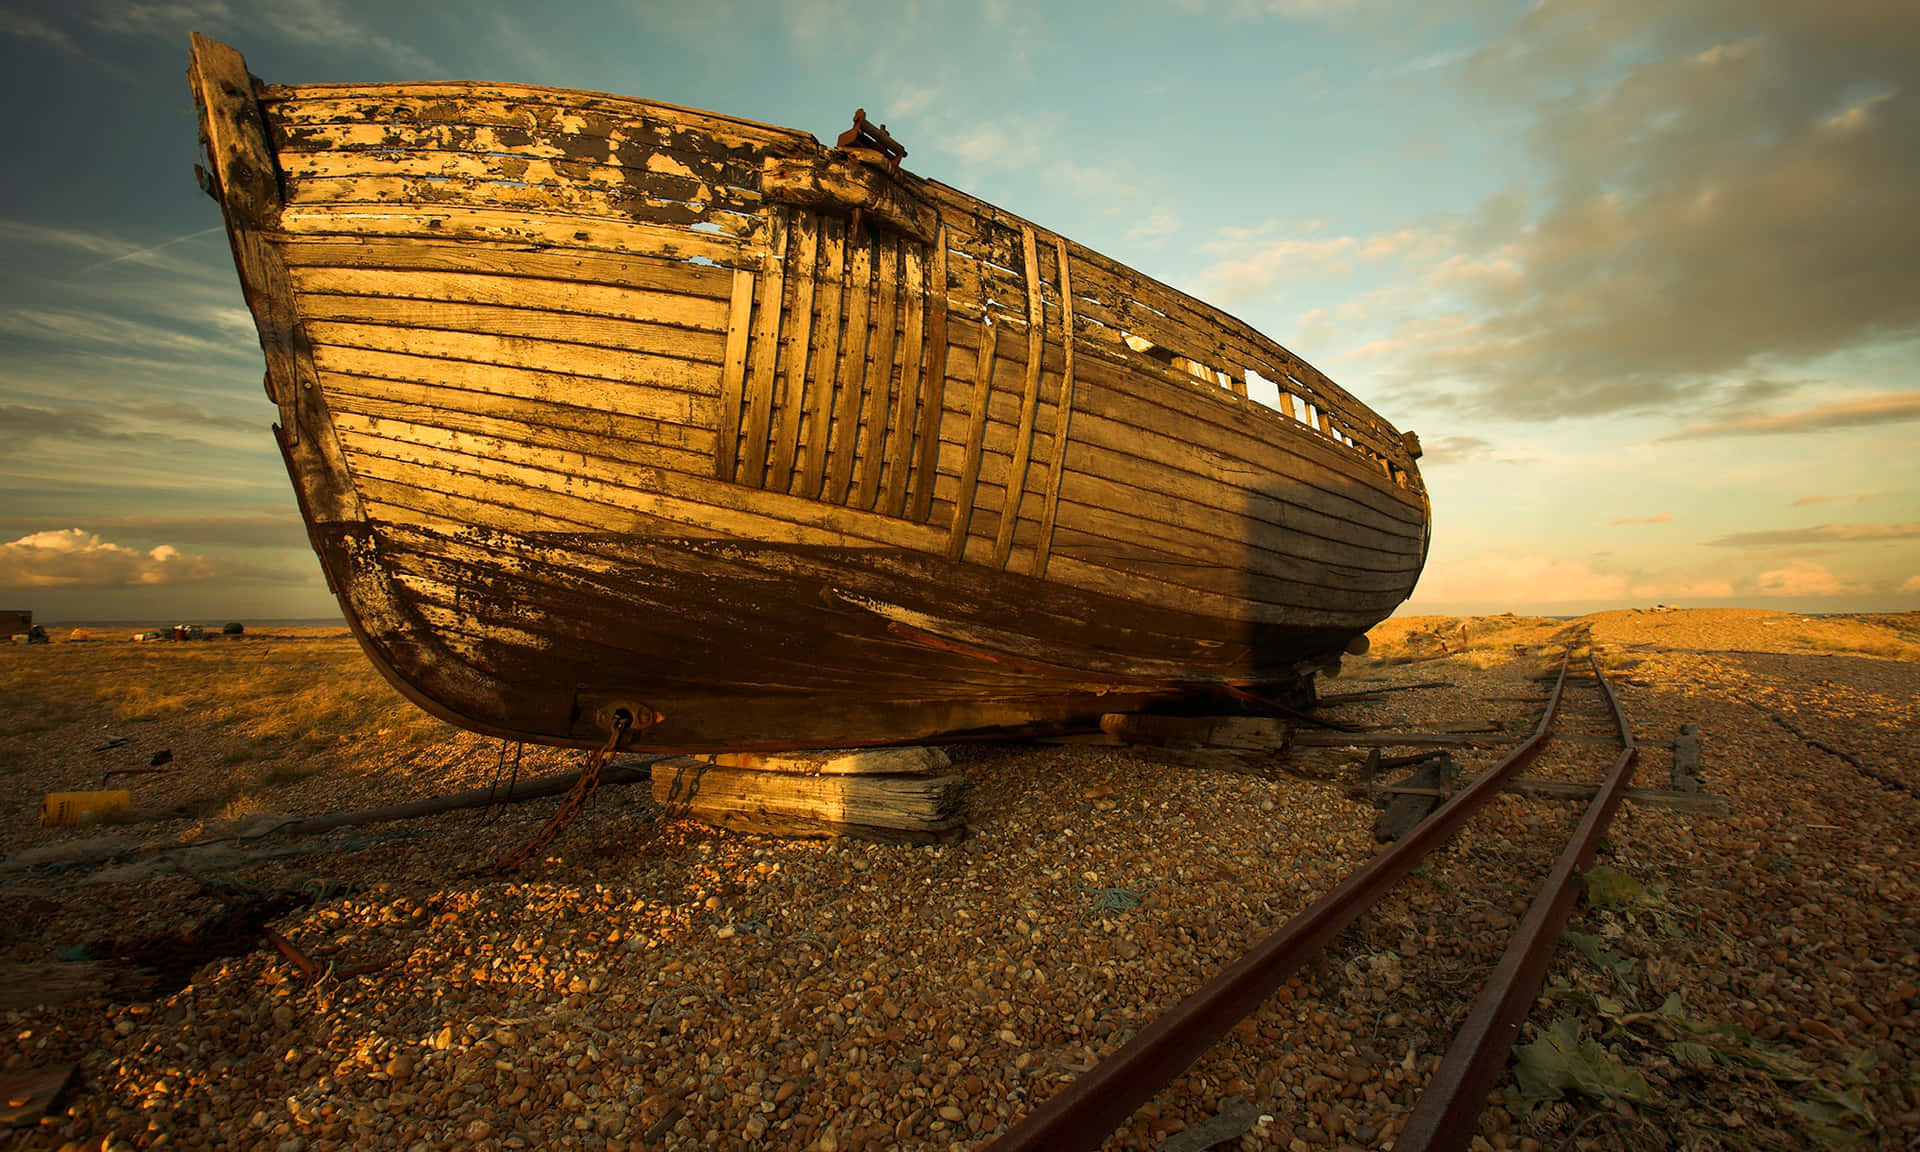 A Wooden Boat On The Tracks